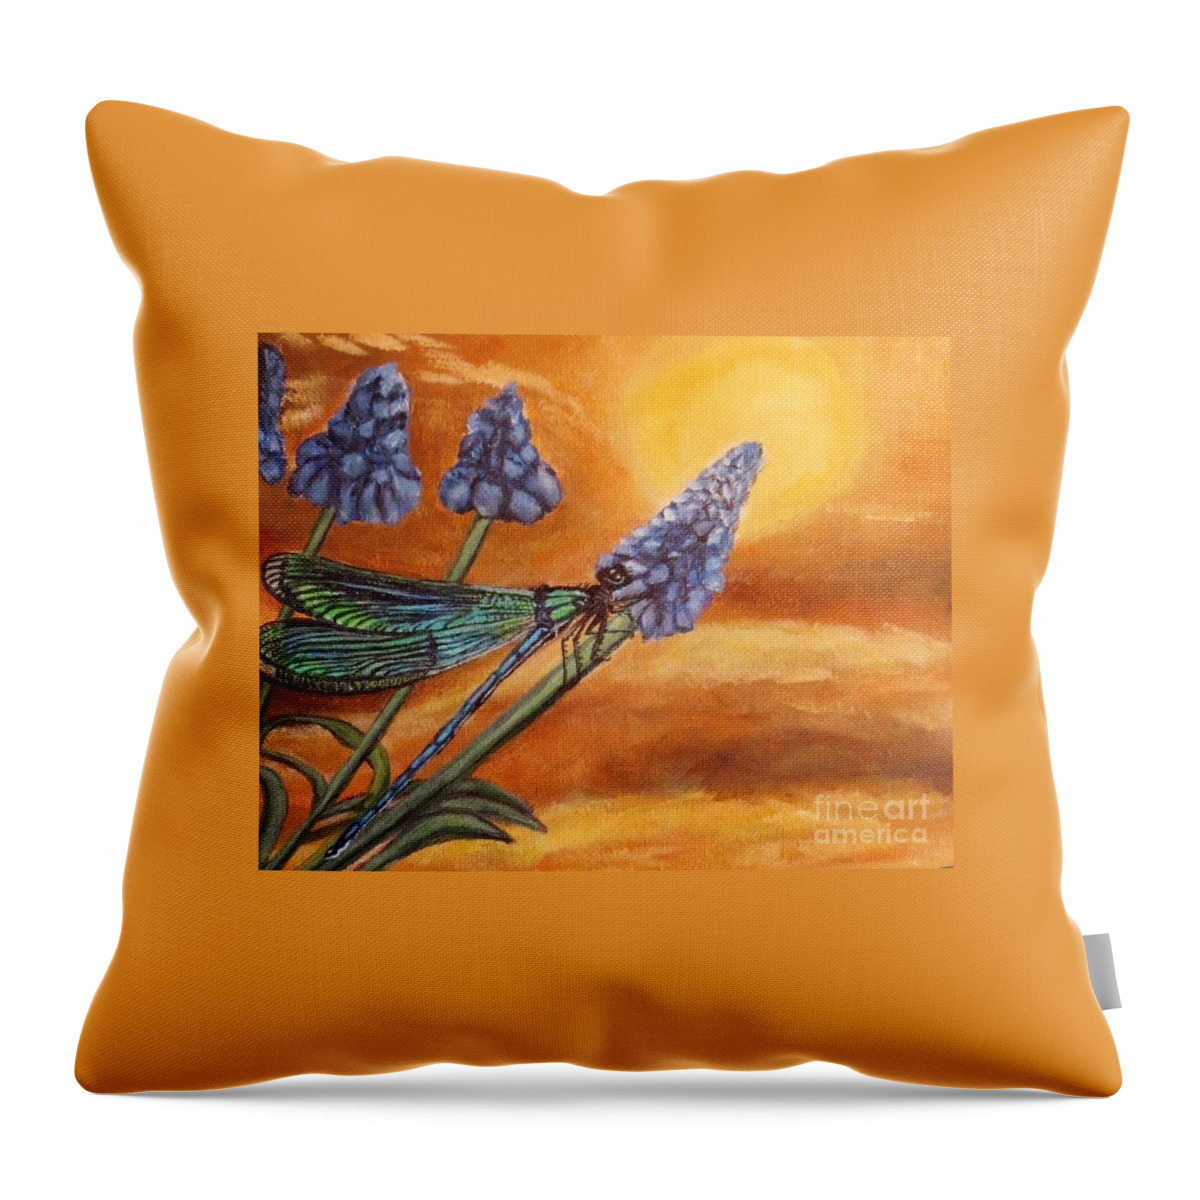 Nature Scene Aquatic Water Scene Ecology With Environmental Message For Conservation For Earth Day Blue Green Dragonfly Blue Prussian Blue Grape Hyacinths Golden Orange Sunset Acrylic Painting Throw Pillow featuring the painting Summer Sunset over a Dragonfly by Kimberlee Baxter